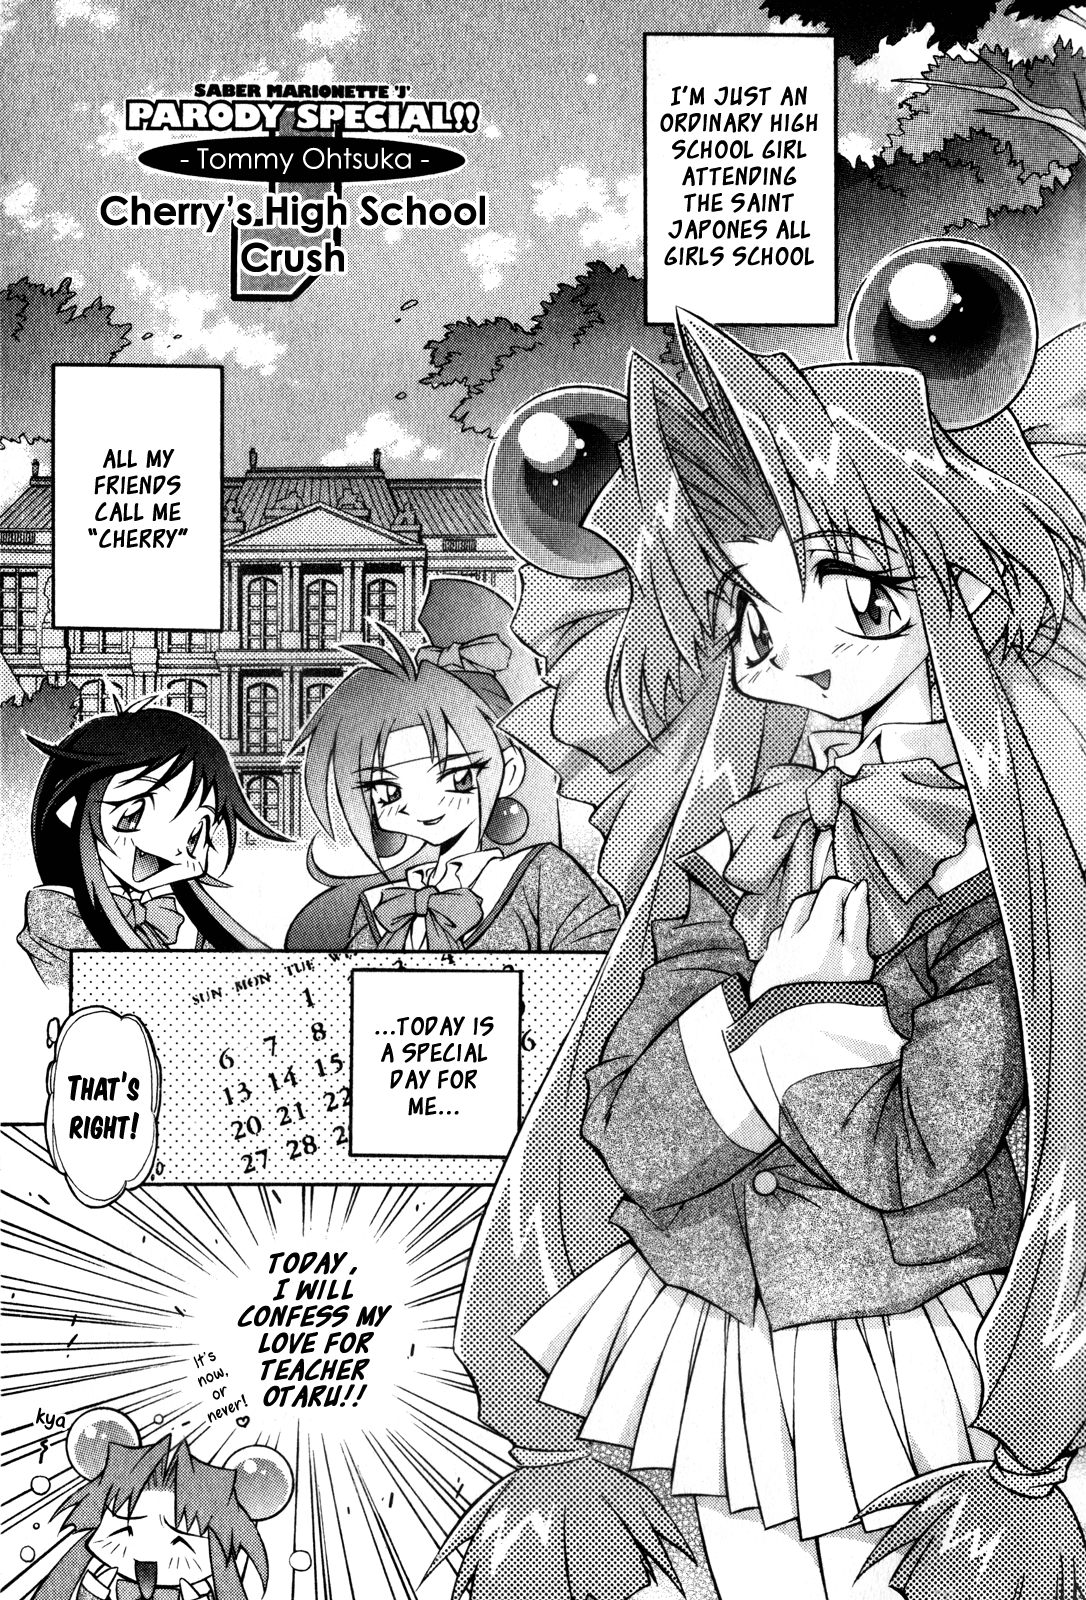 Saber Marionette J Parody Special Chapter 1: Cherry's High School Crush - Picture 3